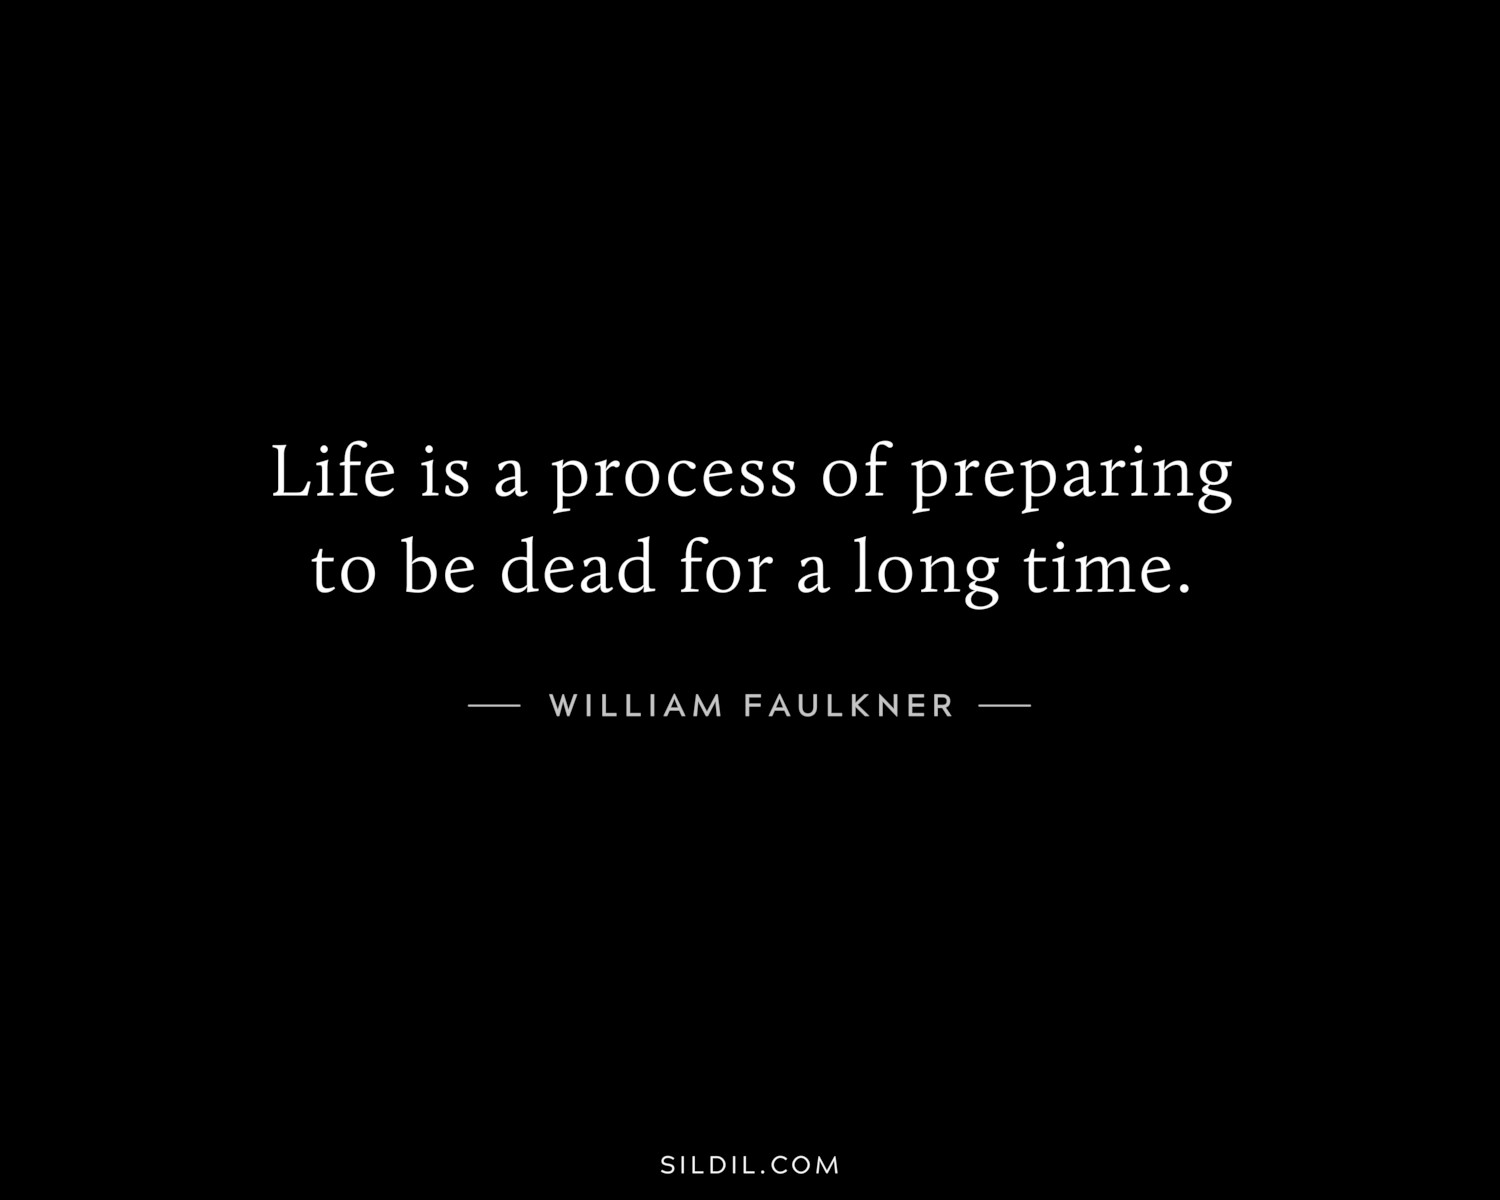 Life is a process of preparing to be dead for a long time.